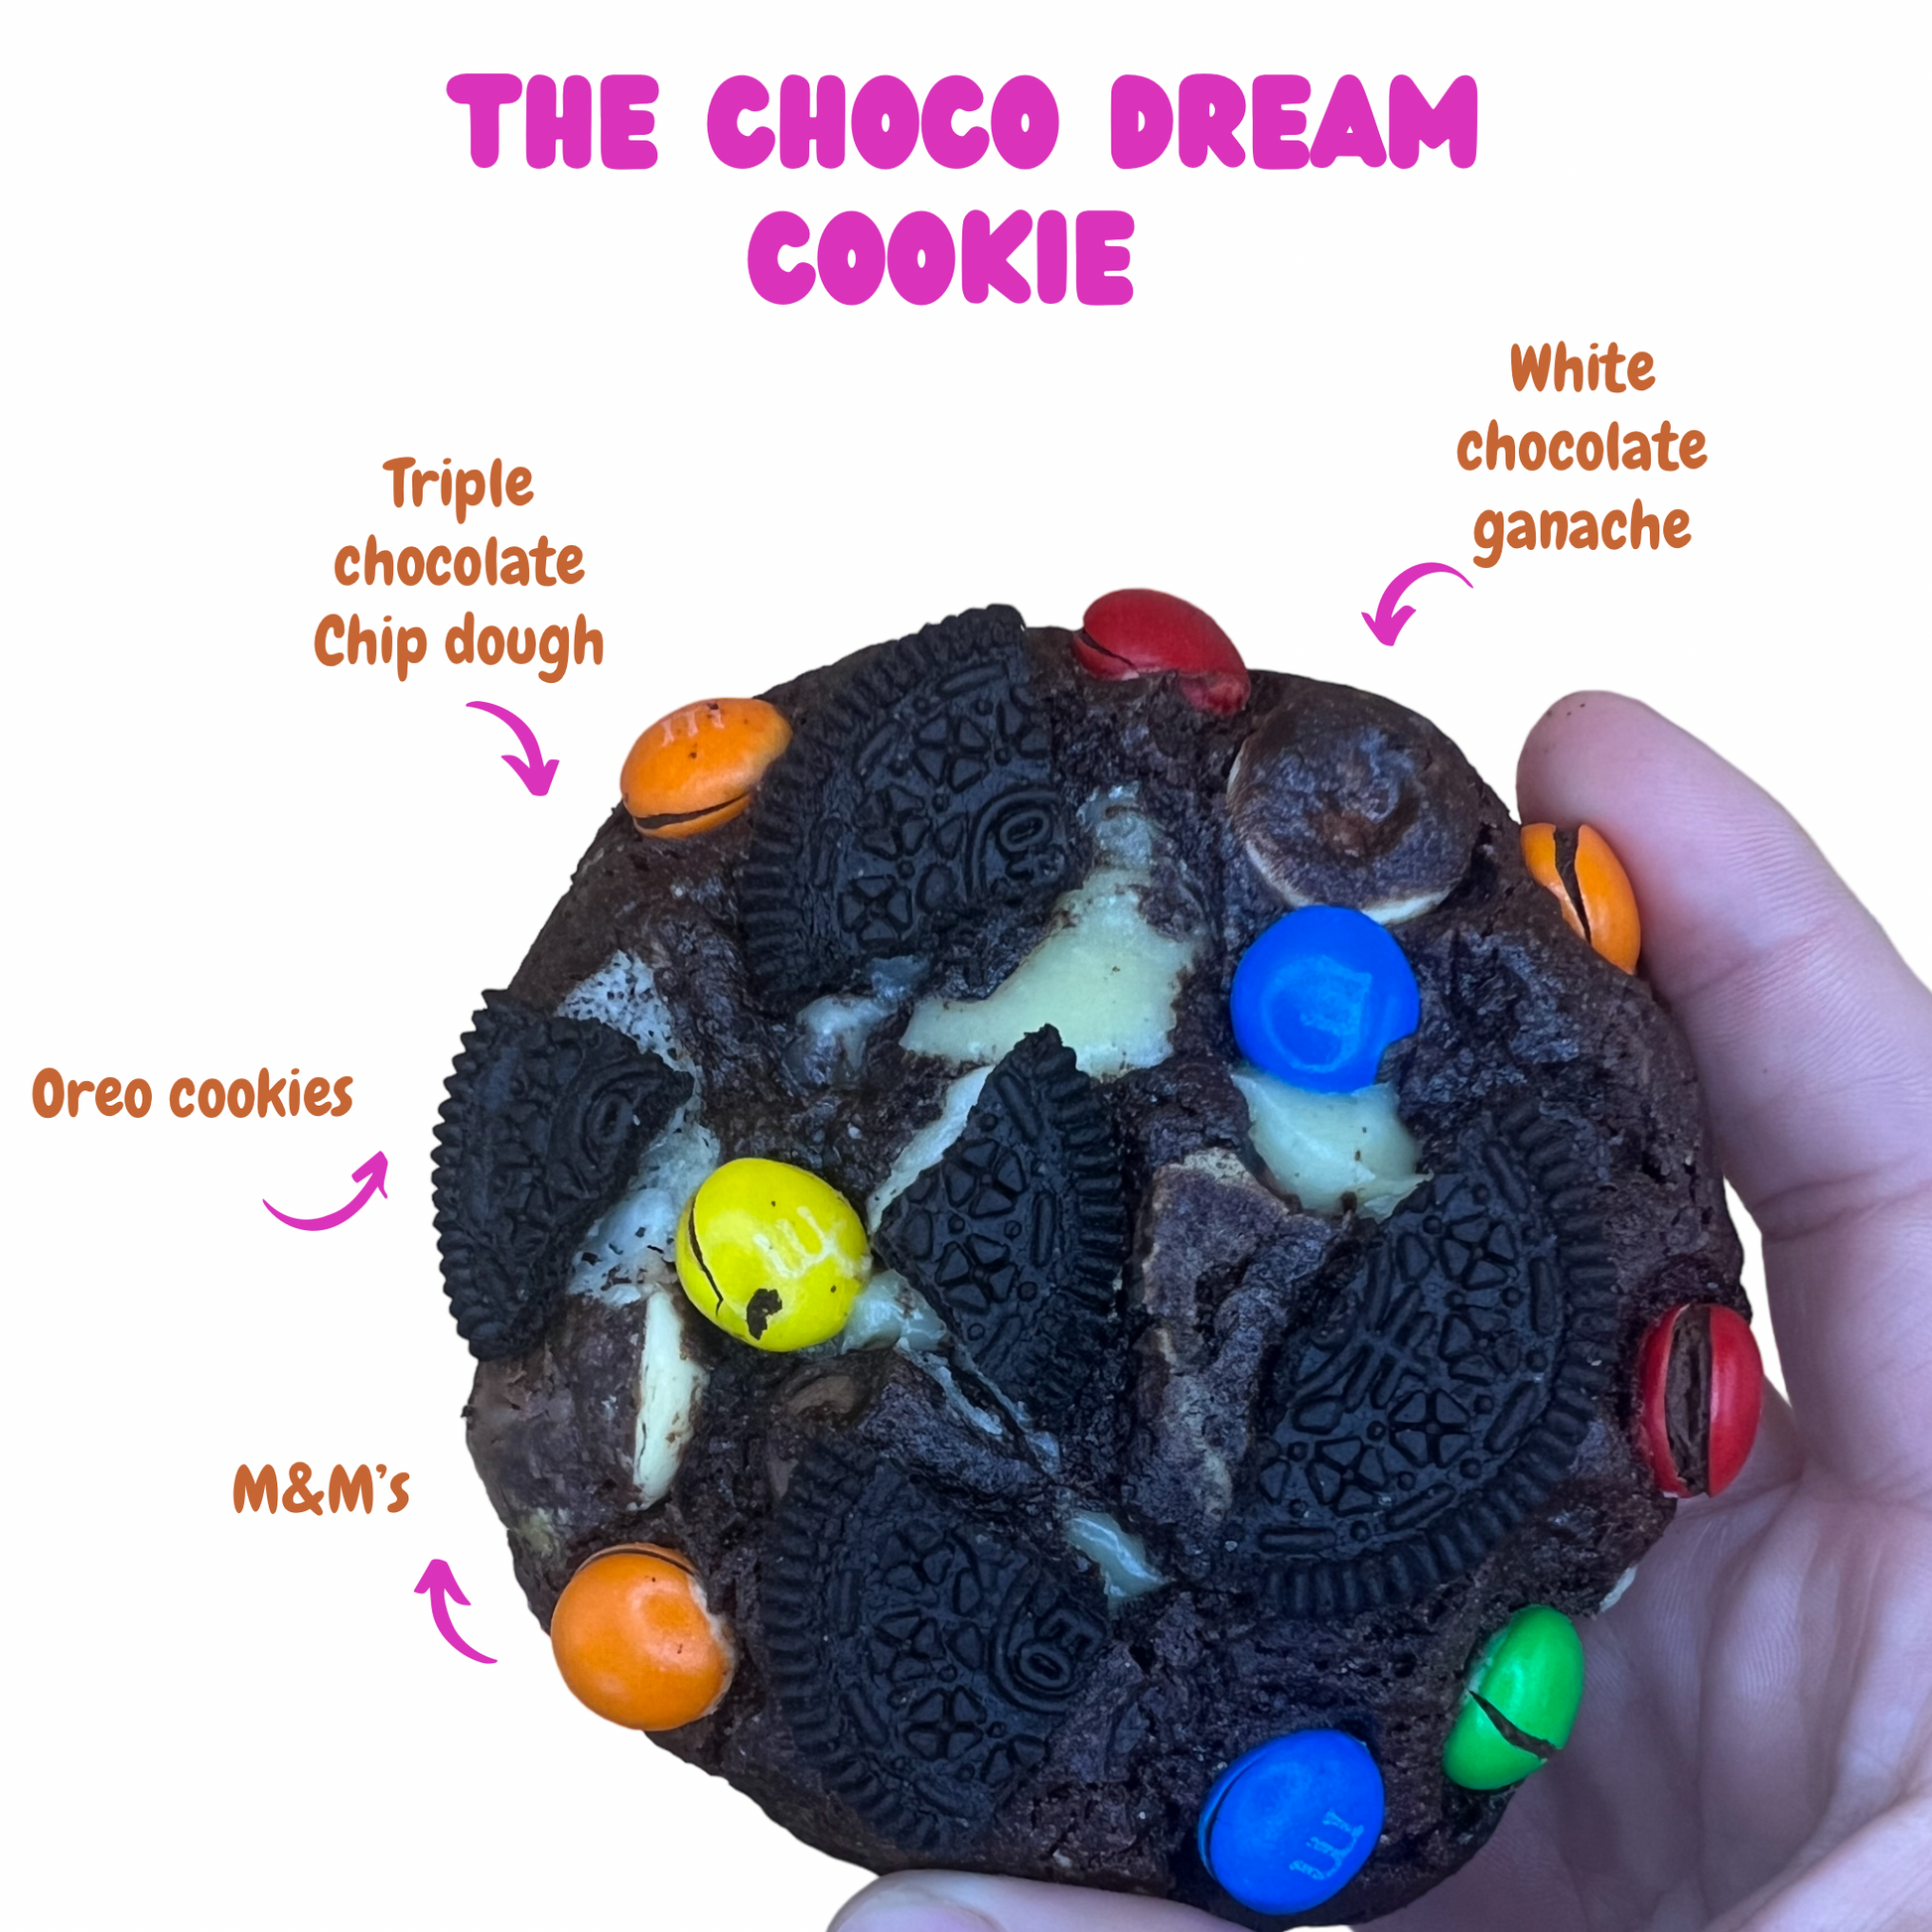 Heavenly Choco Dream Cookie - A Chocolate Lover's Delight!